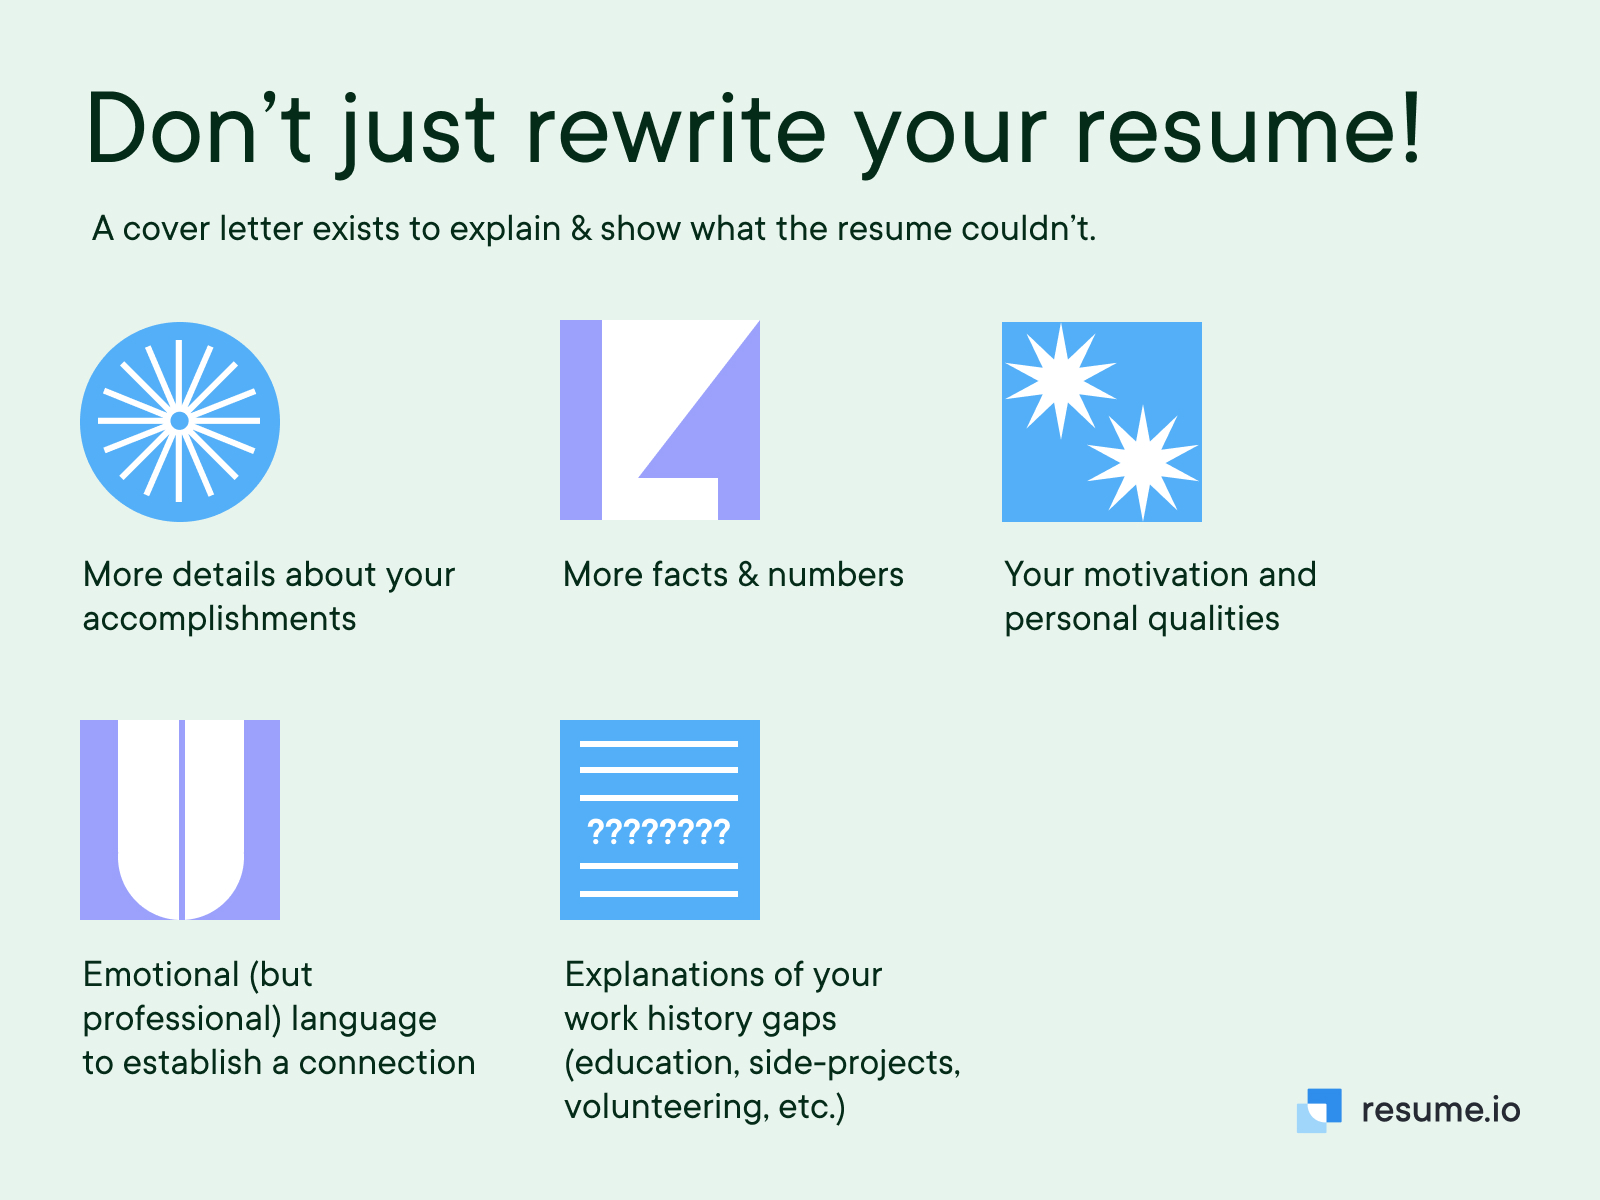 Don't just rewrite your resume!